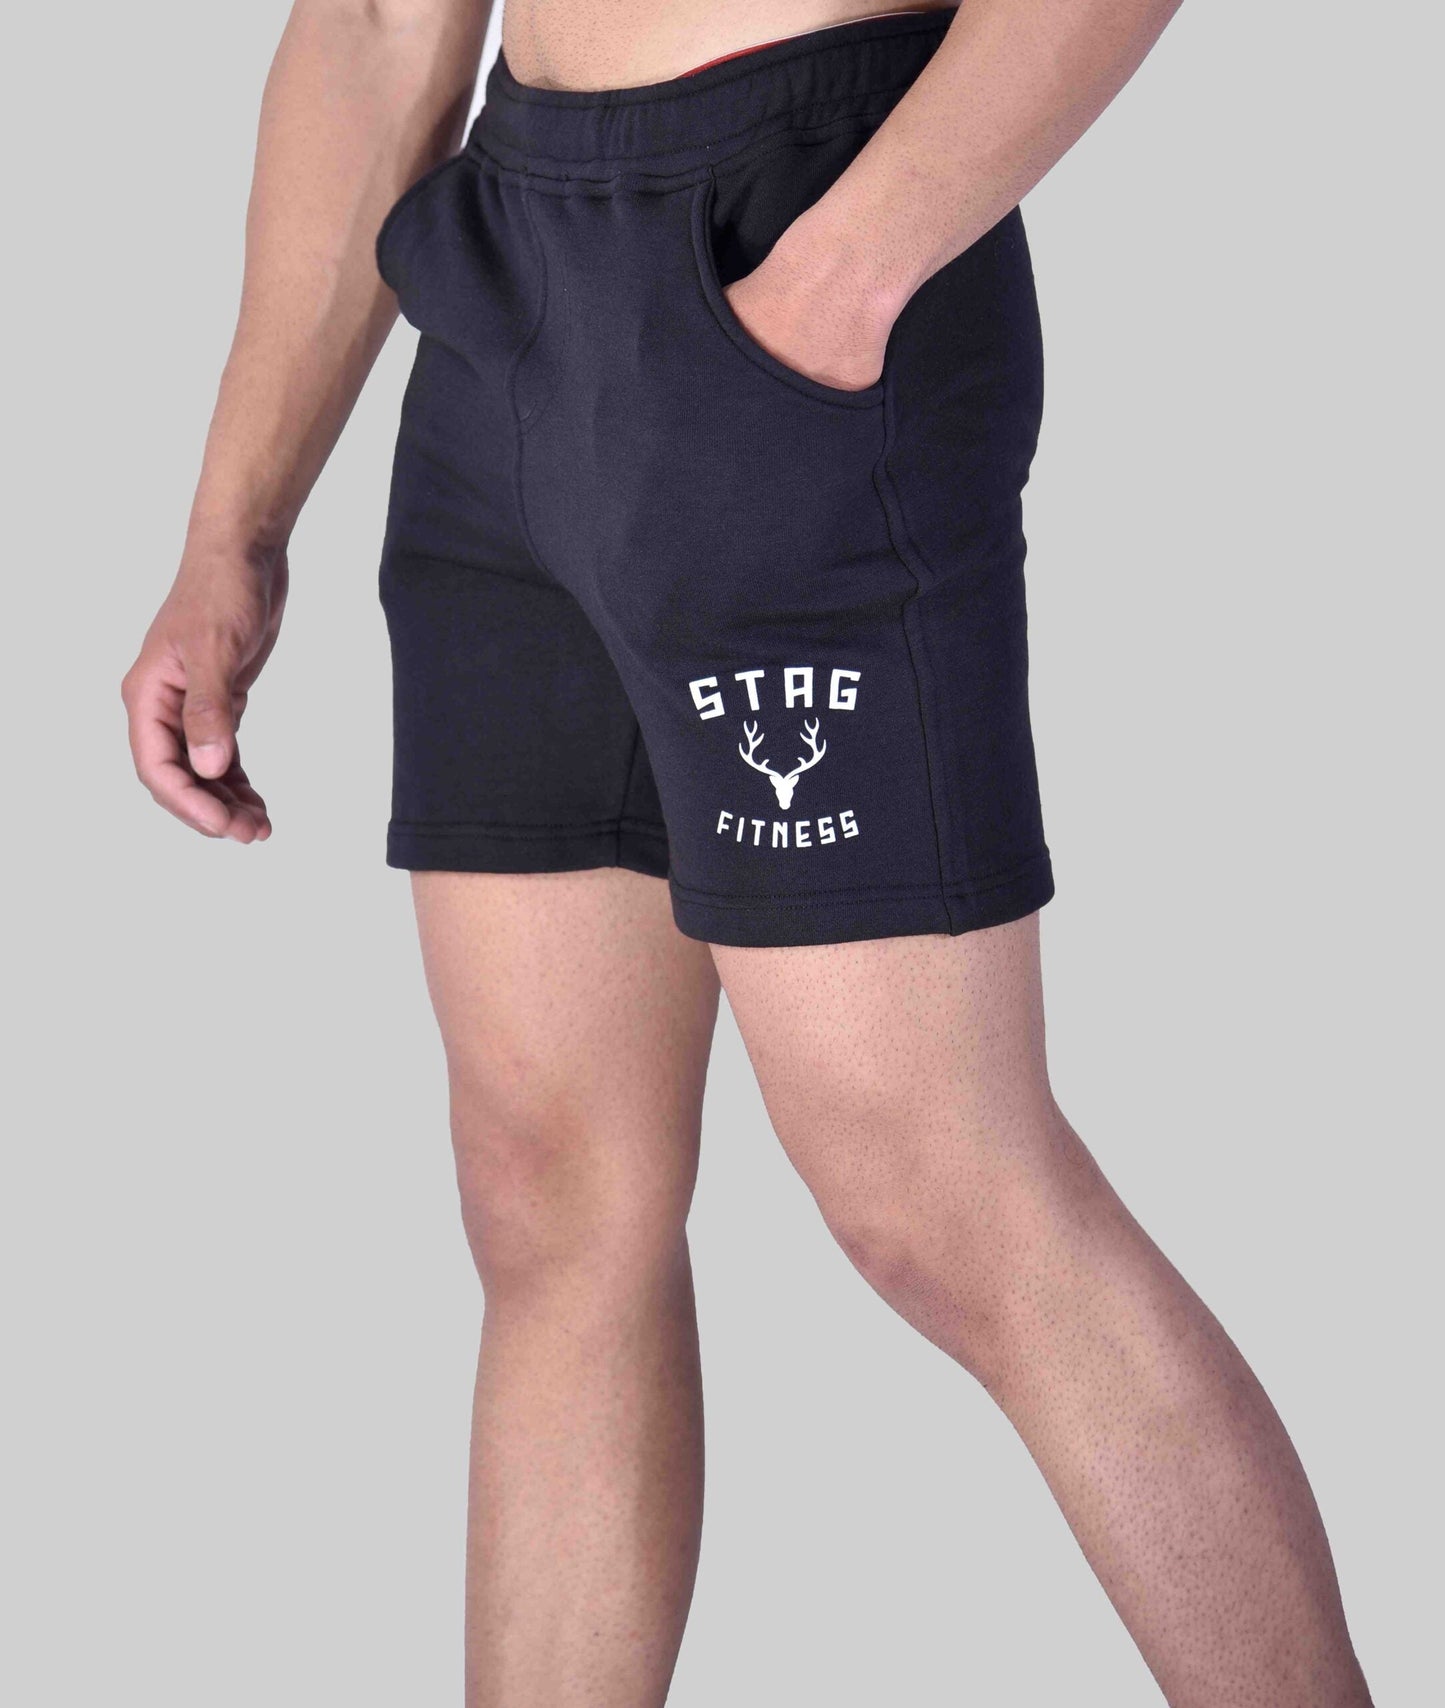 Ultimate Body Building Shorts 1.0 (Black) - Stag Clothing 